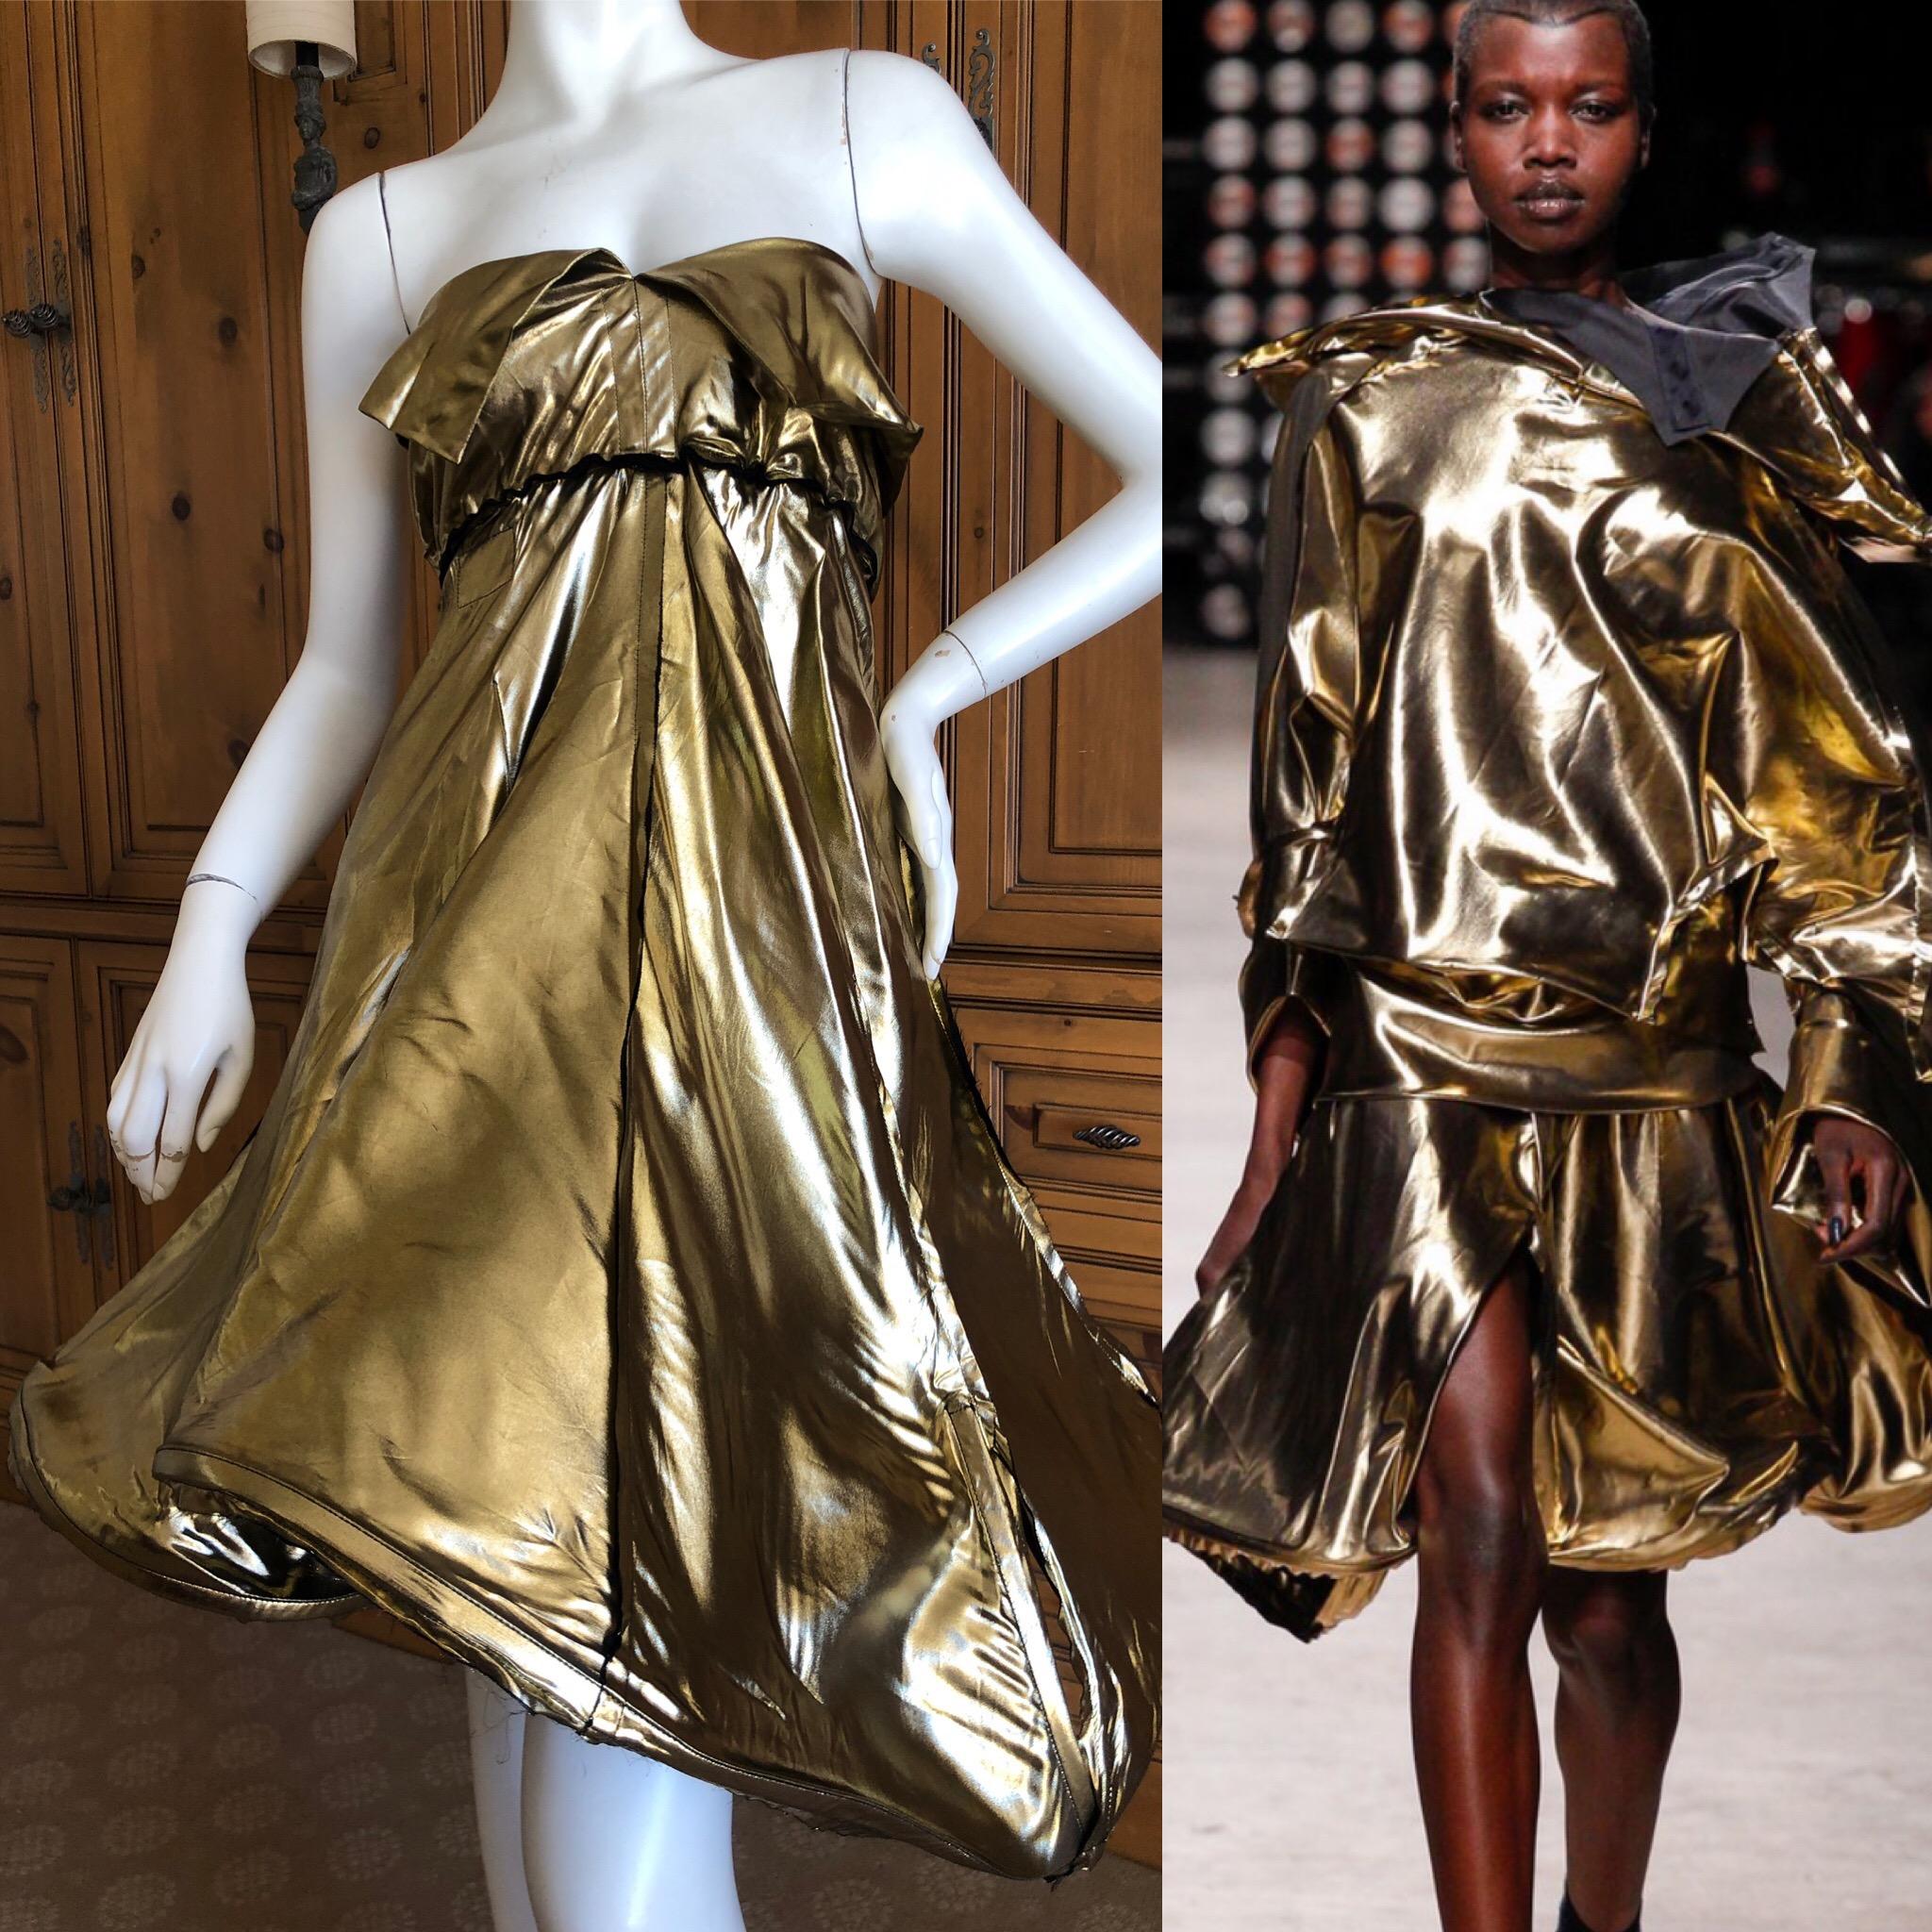 Andreas Kronthaler for Vivienne Westwood 2016 Gold Lame Skirt or Dress.
Wired in the hem for a 3D effect.
I think this is a skirt, with a very stretchy elastic waist, but I also styled it as a dress by clipping it on the back.
There is a lot of